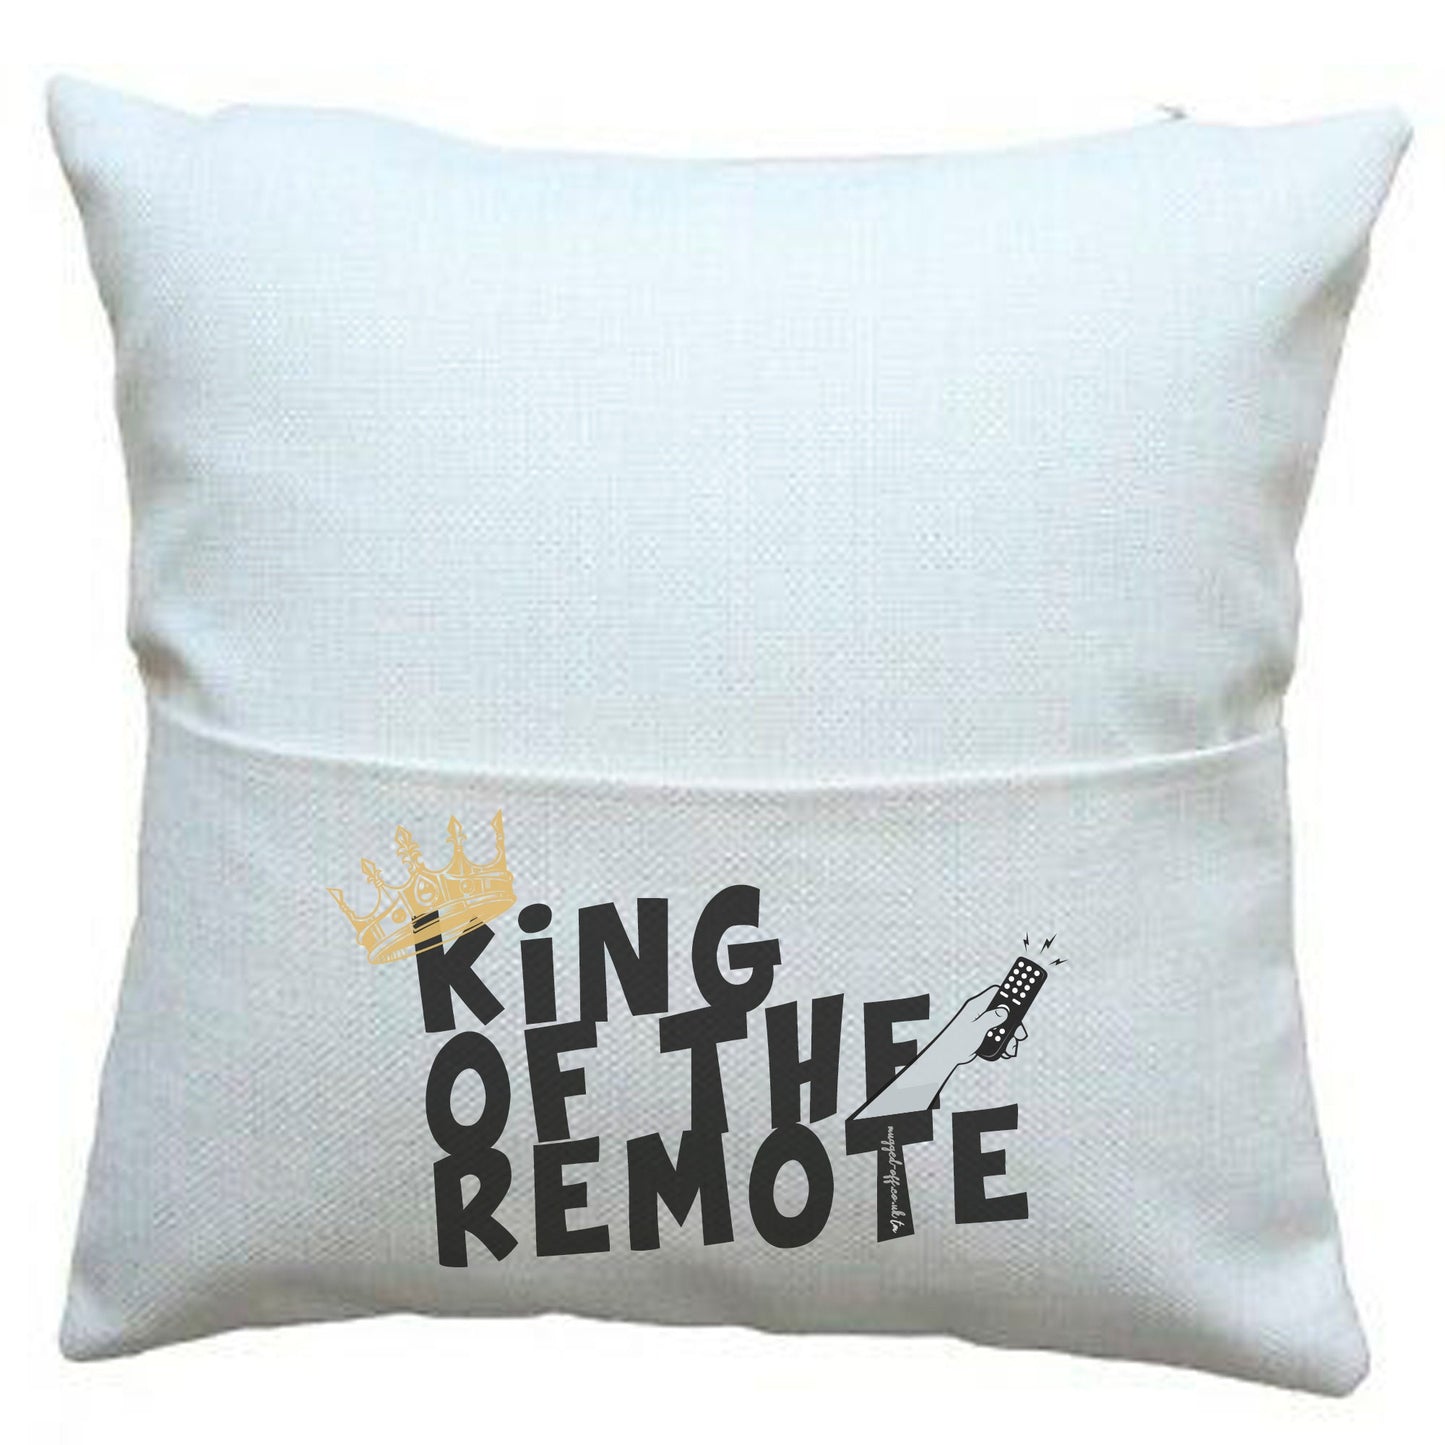 TV Remote Pillow Cushion cover dad mum gifts xmas birthday gift never lose that TV Remote again